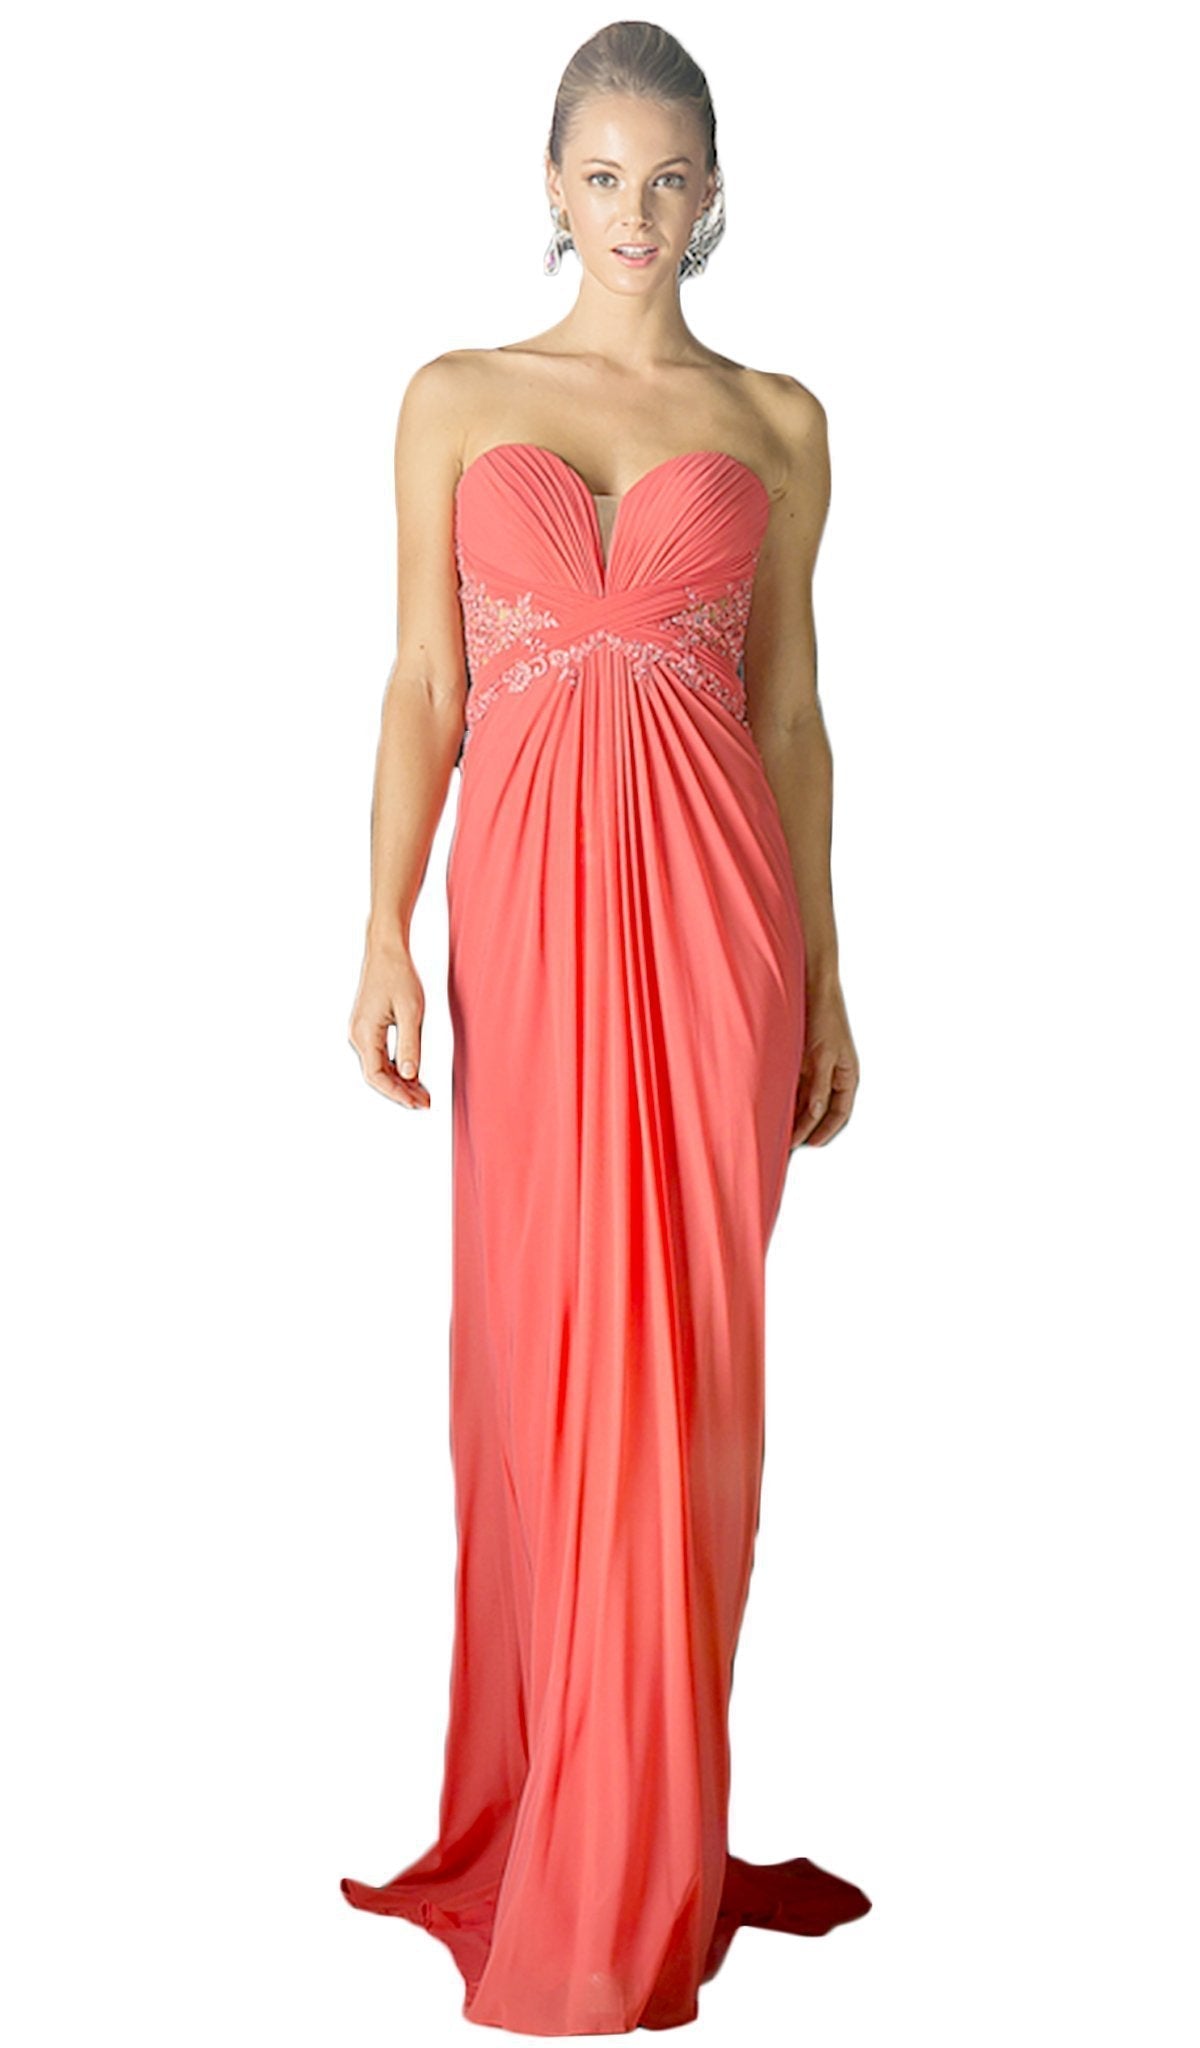 Cinderella Divine - Crisscrossed Strapless Applique Ornate Long Gown Special Occasion Dress 2 / Coral